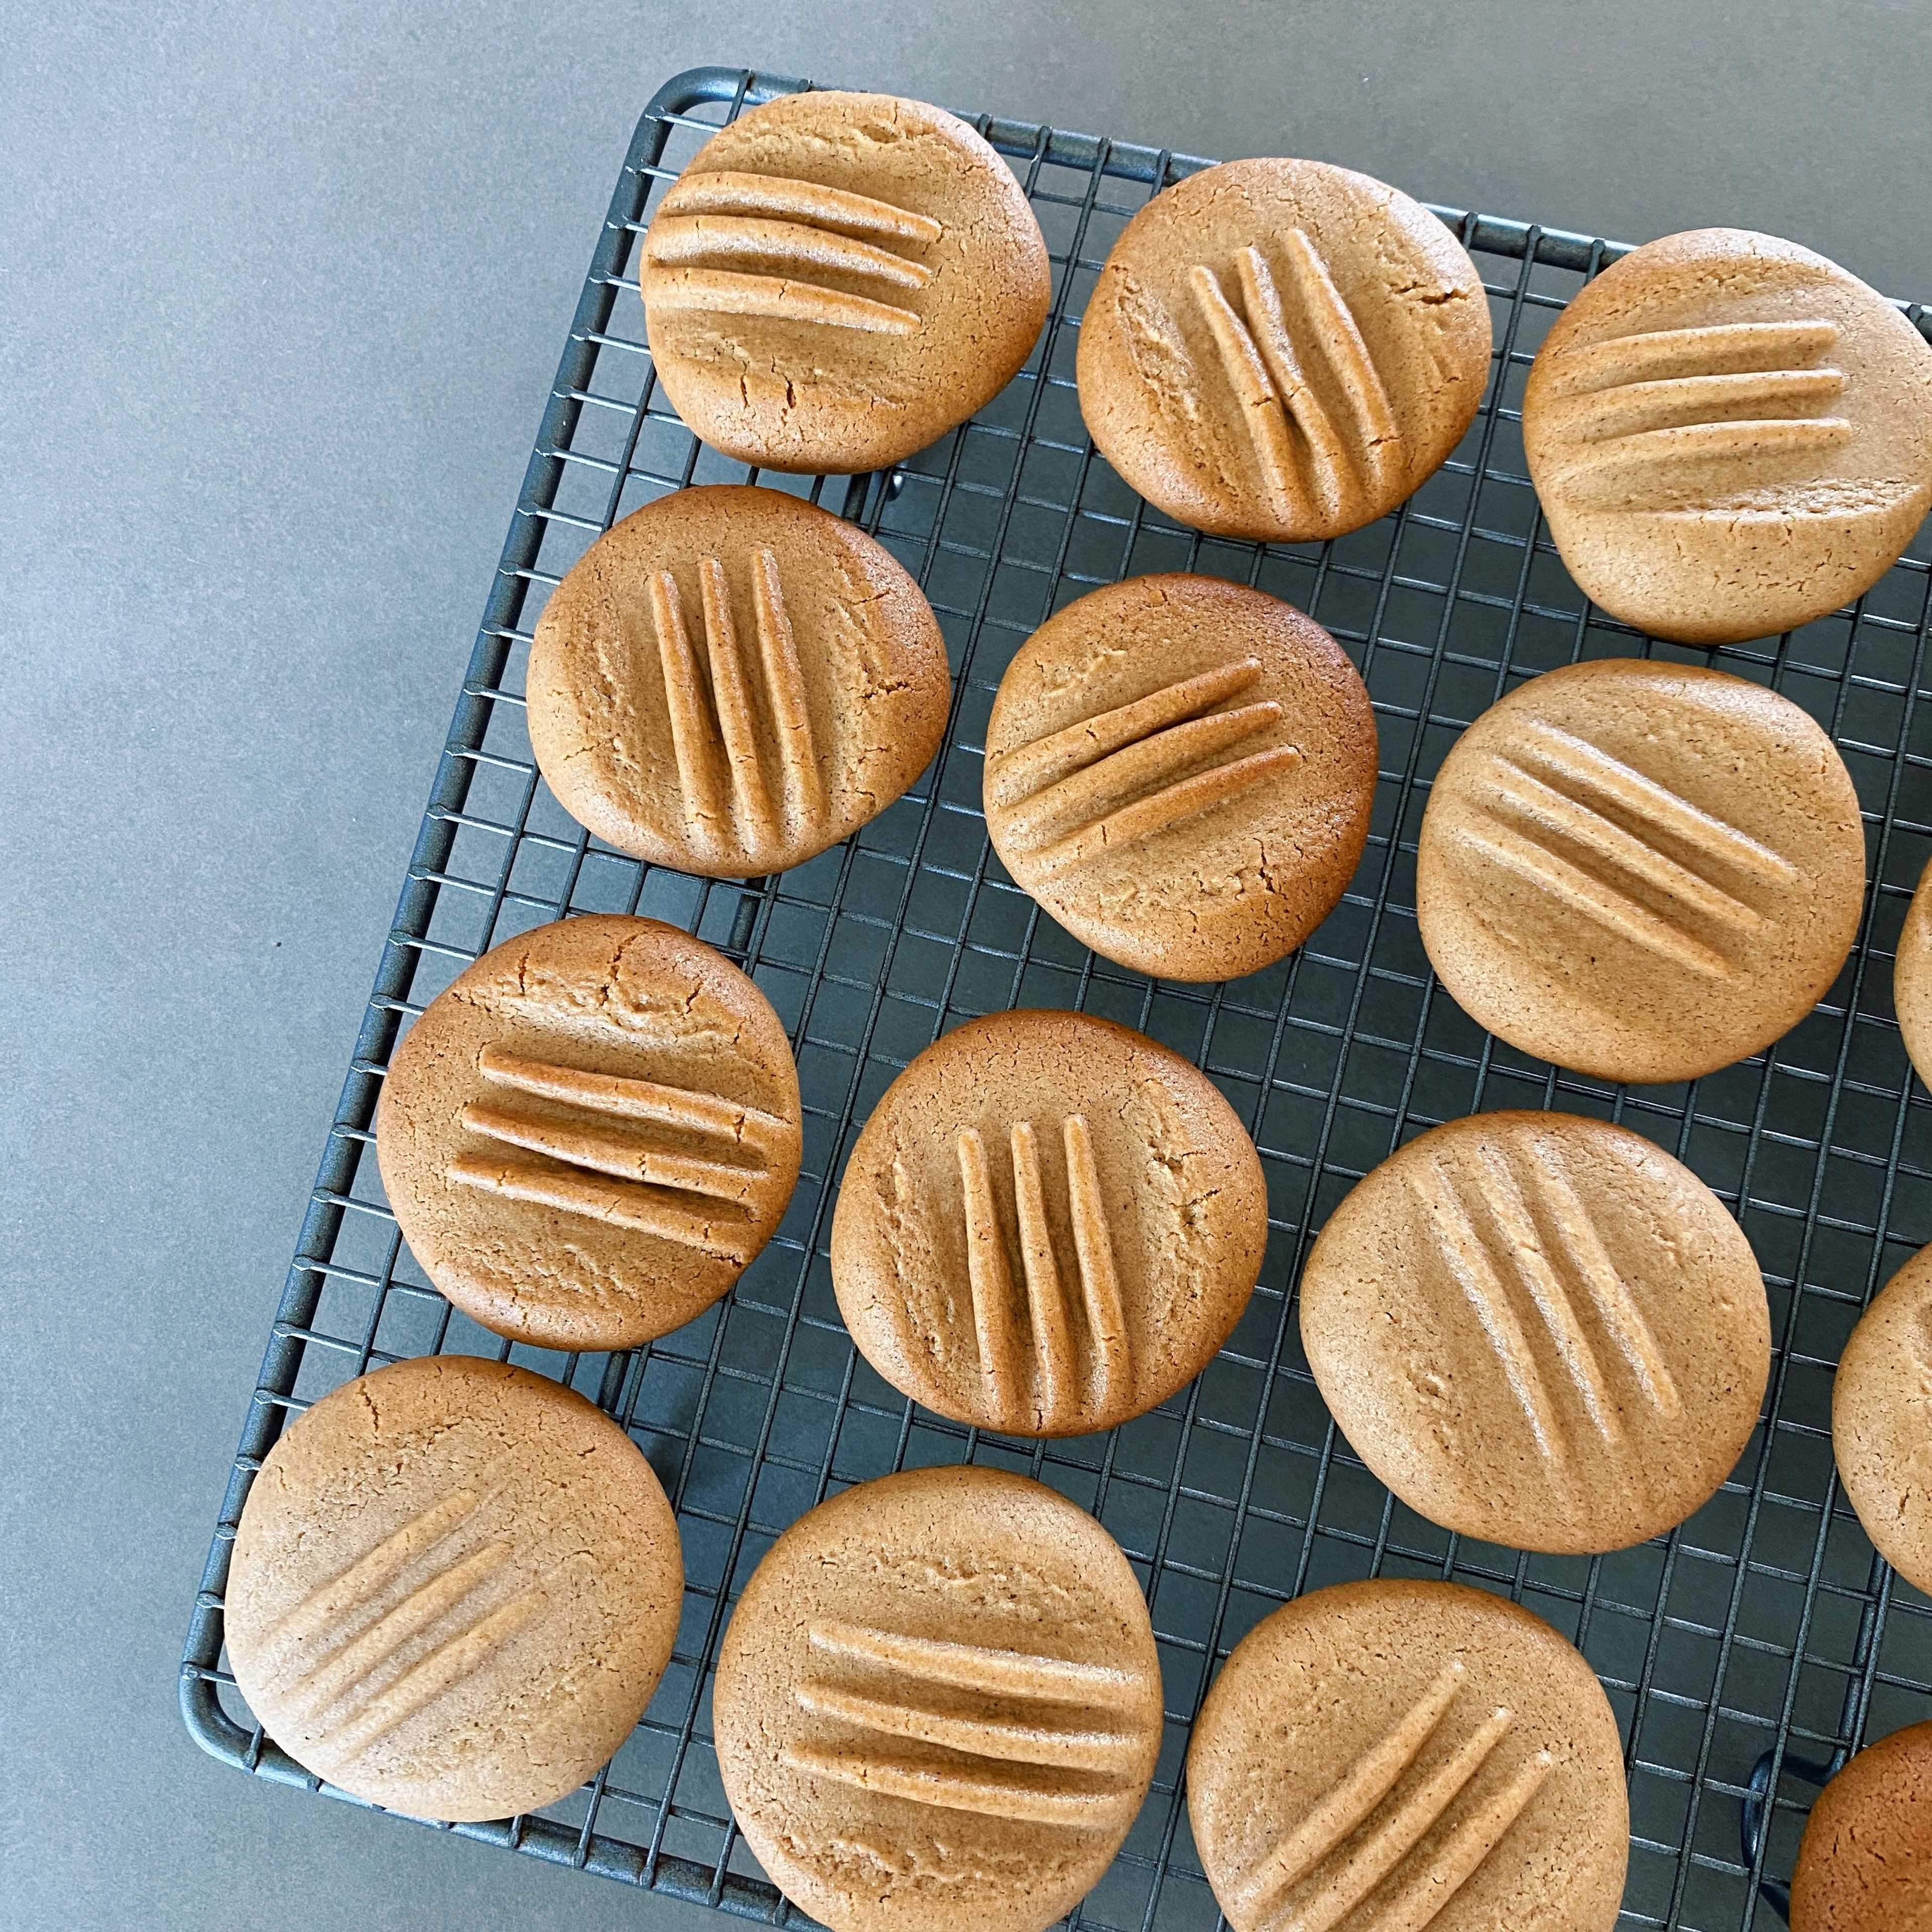 Bake for approximately eight minutes or until biscuits are a deep golden colour, but not burnt. Remove from oven and transfer biscuits to a wire rack after one minute. Allow to cool.